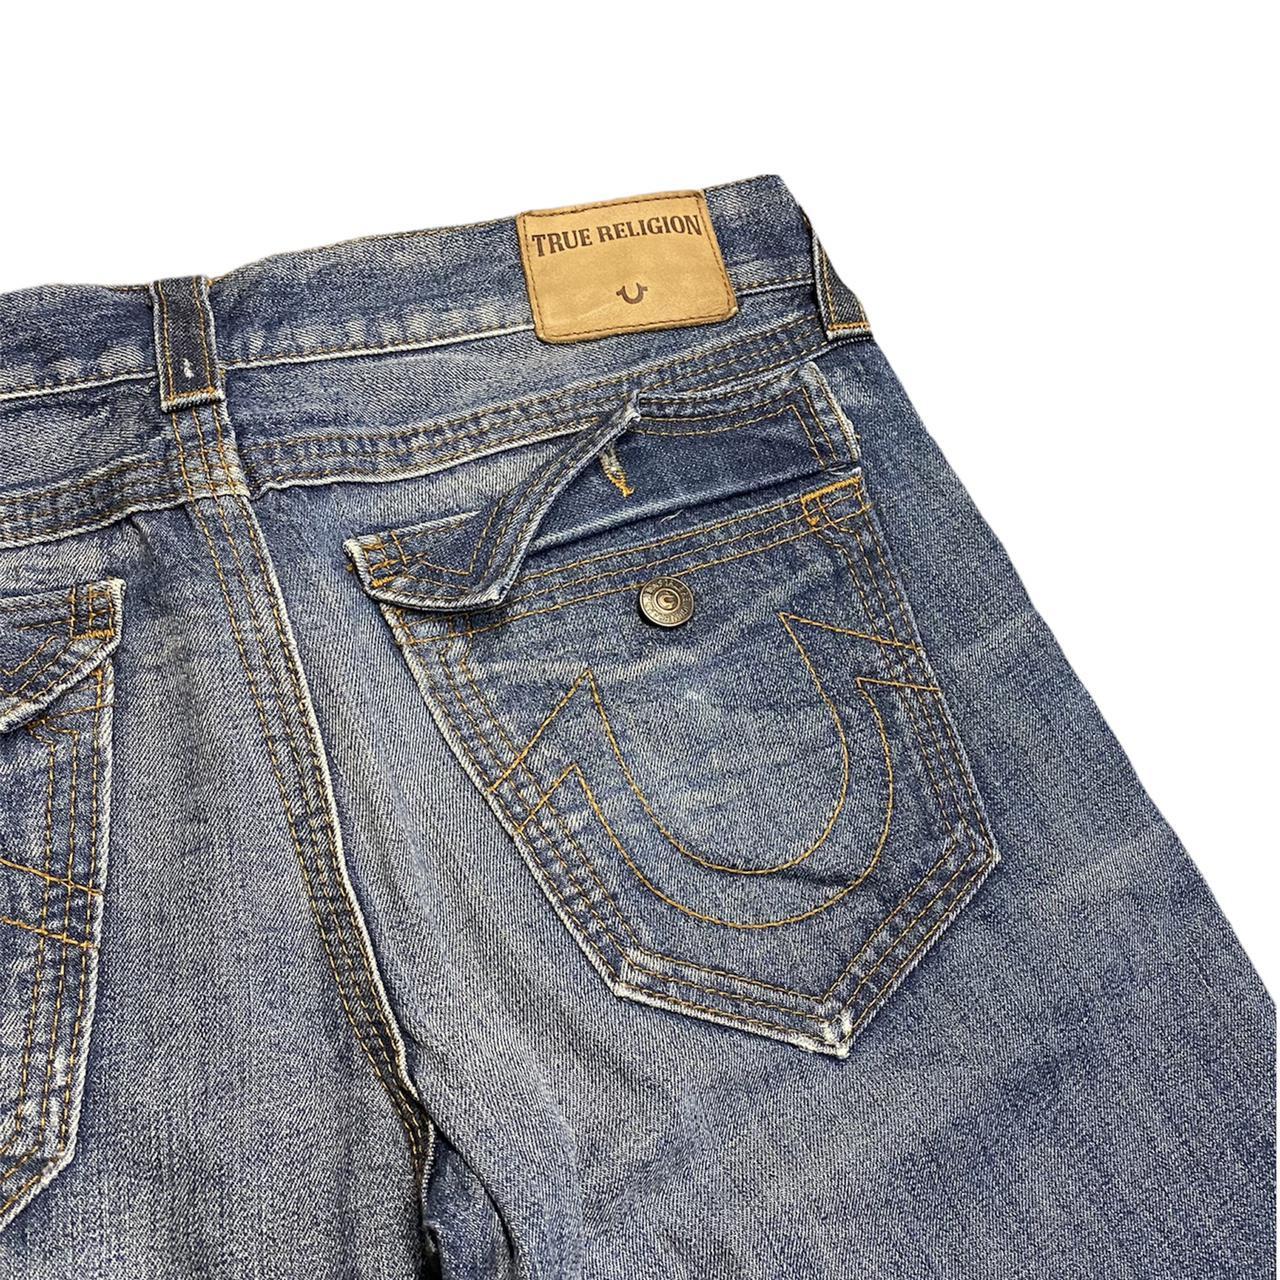 Product Image 3 - Blue True Religion Ricky Distressed